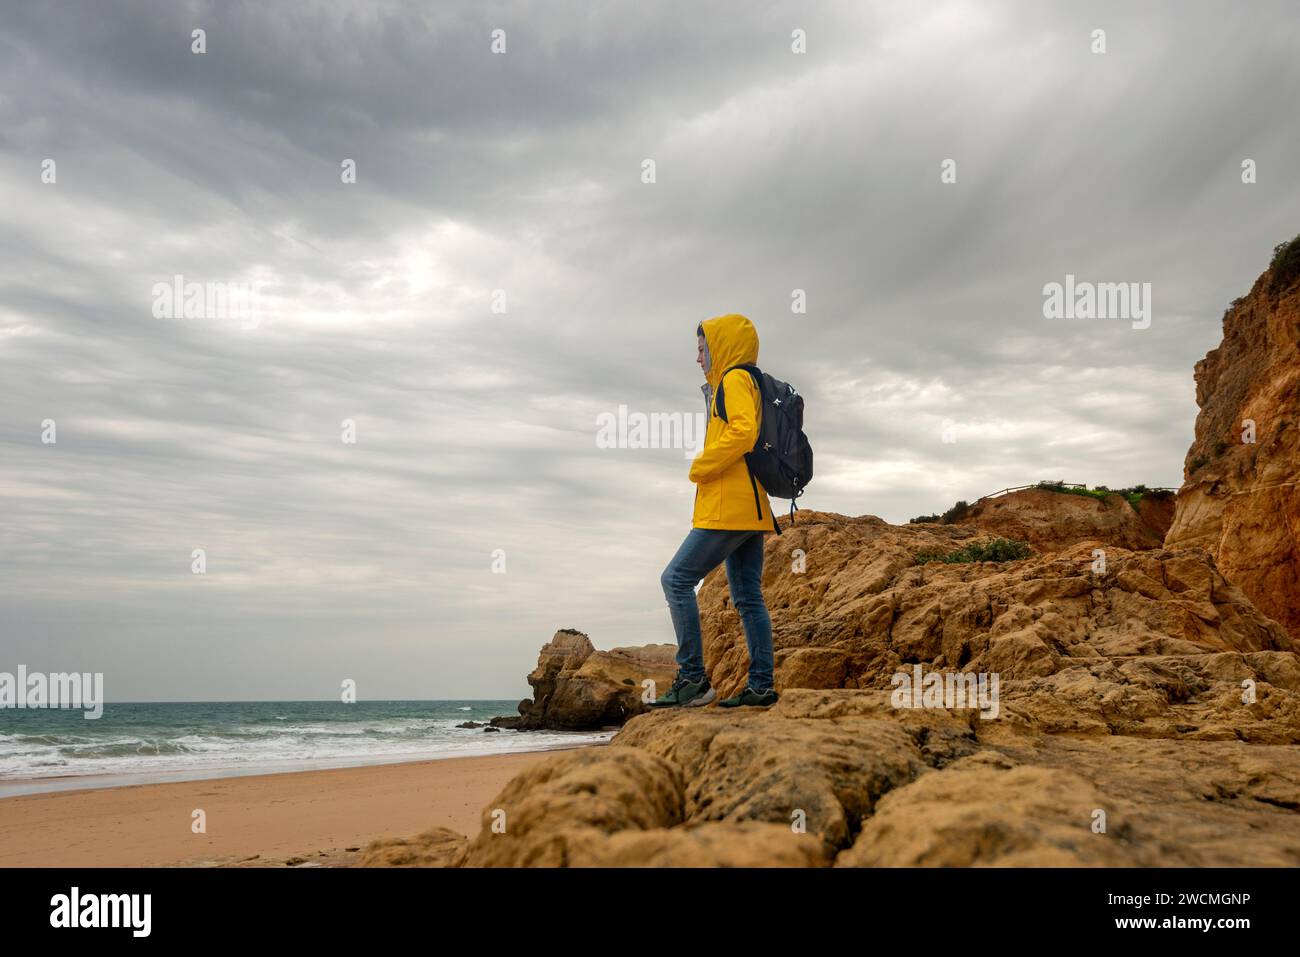 mid adult female walker standing on rocks and looking at coastal view on gloomy day Stock Photo